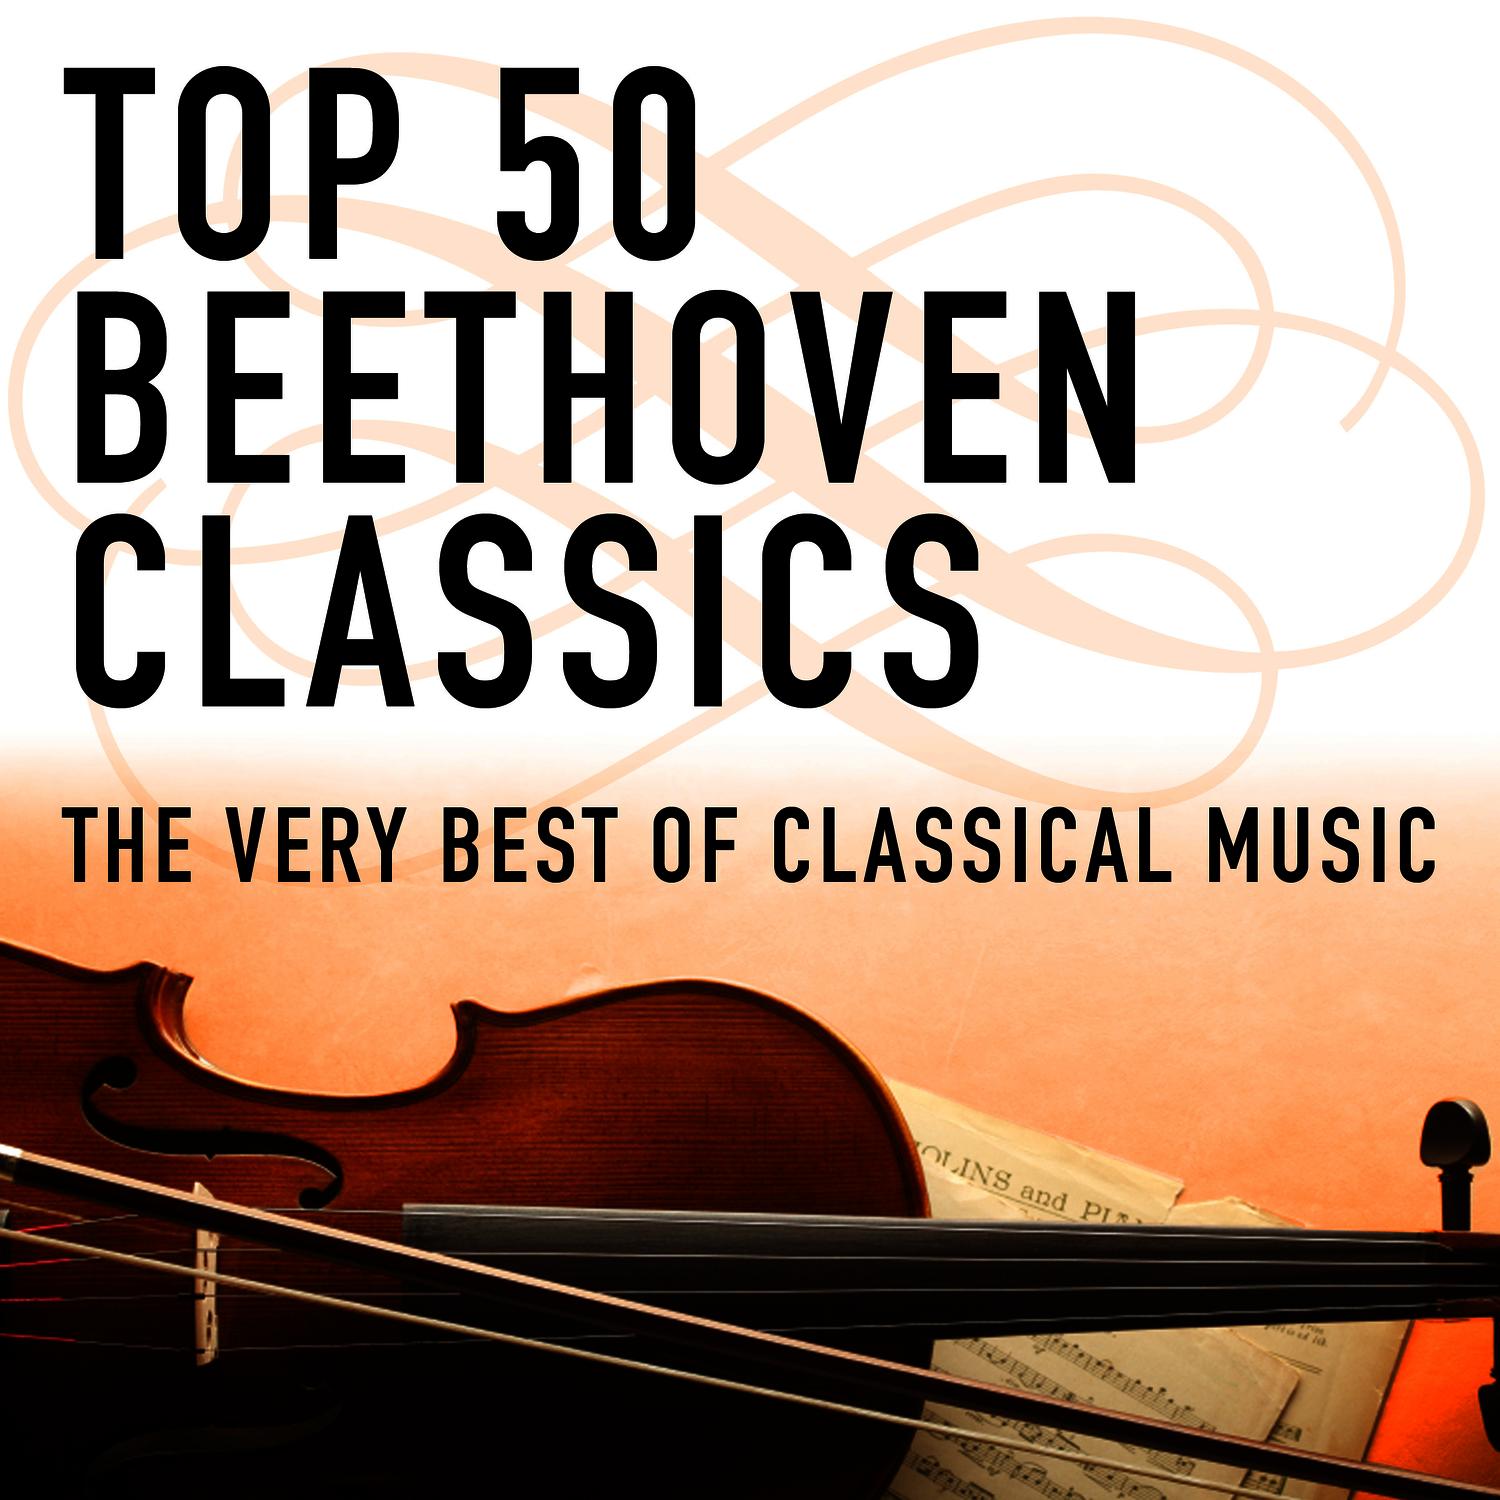 Top 50 Beethoven Classics - The Very Best of Classical Music